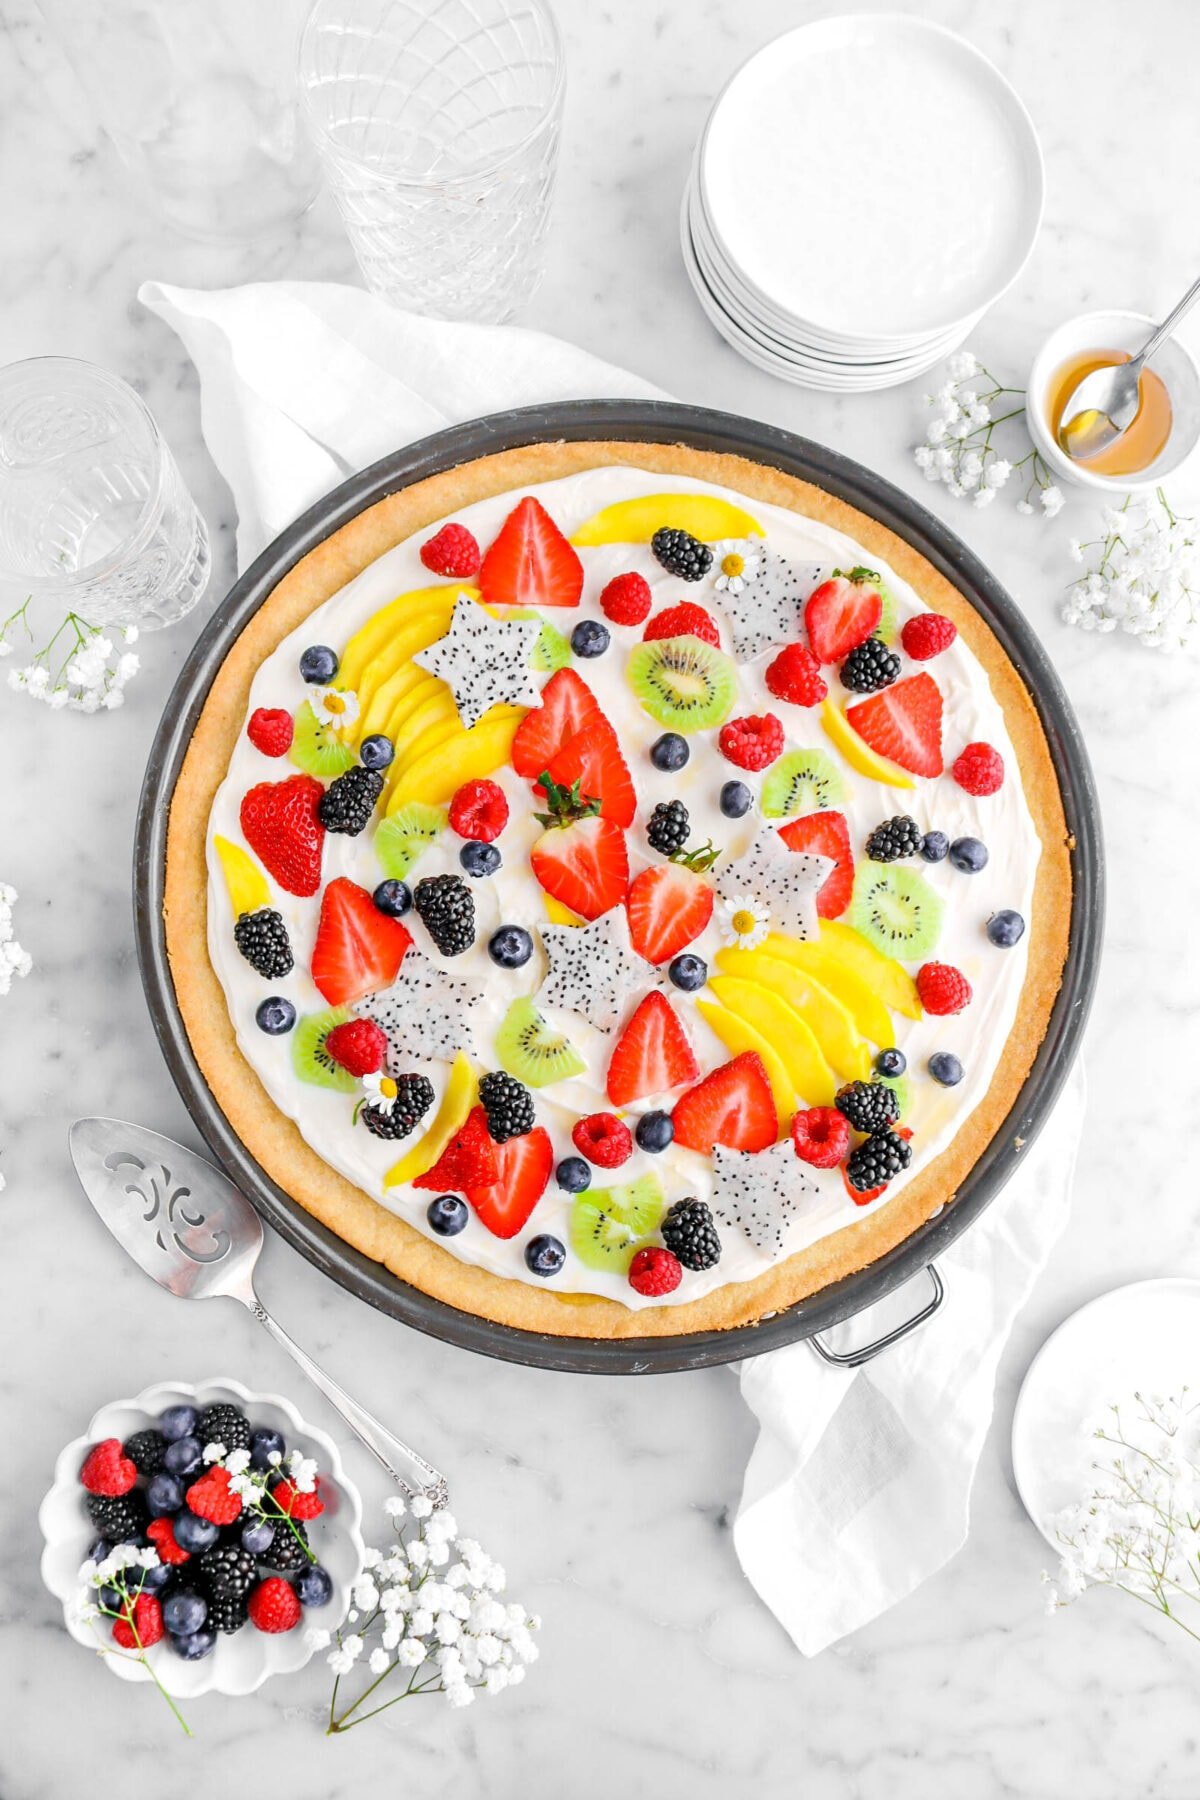 fruit pizza in pizza pan on top of white napkin with white flowers, bowl of berries, cake knife, bowl of honey, stack of plates, and empty glasses on marble surface.